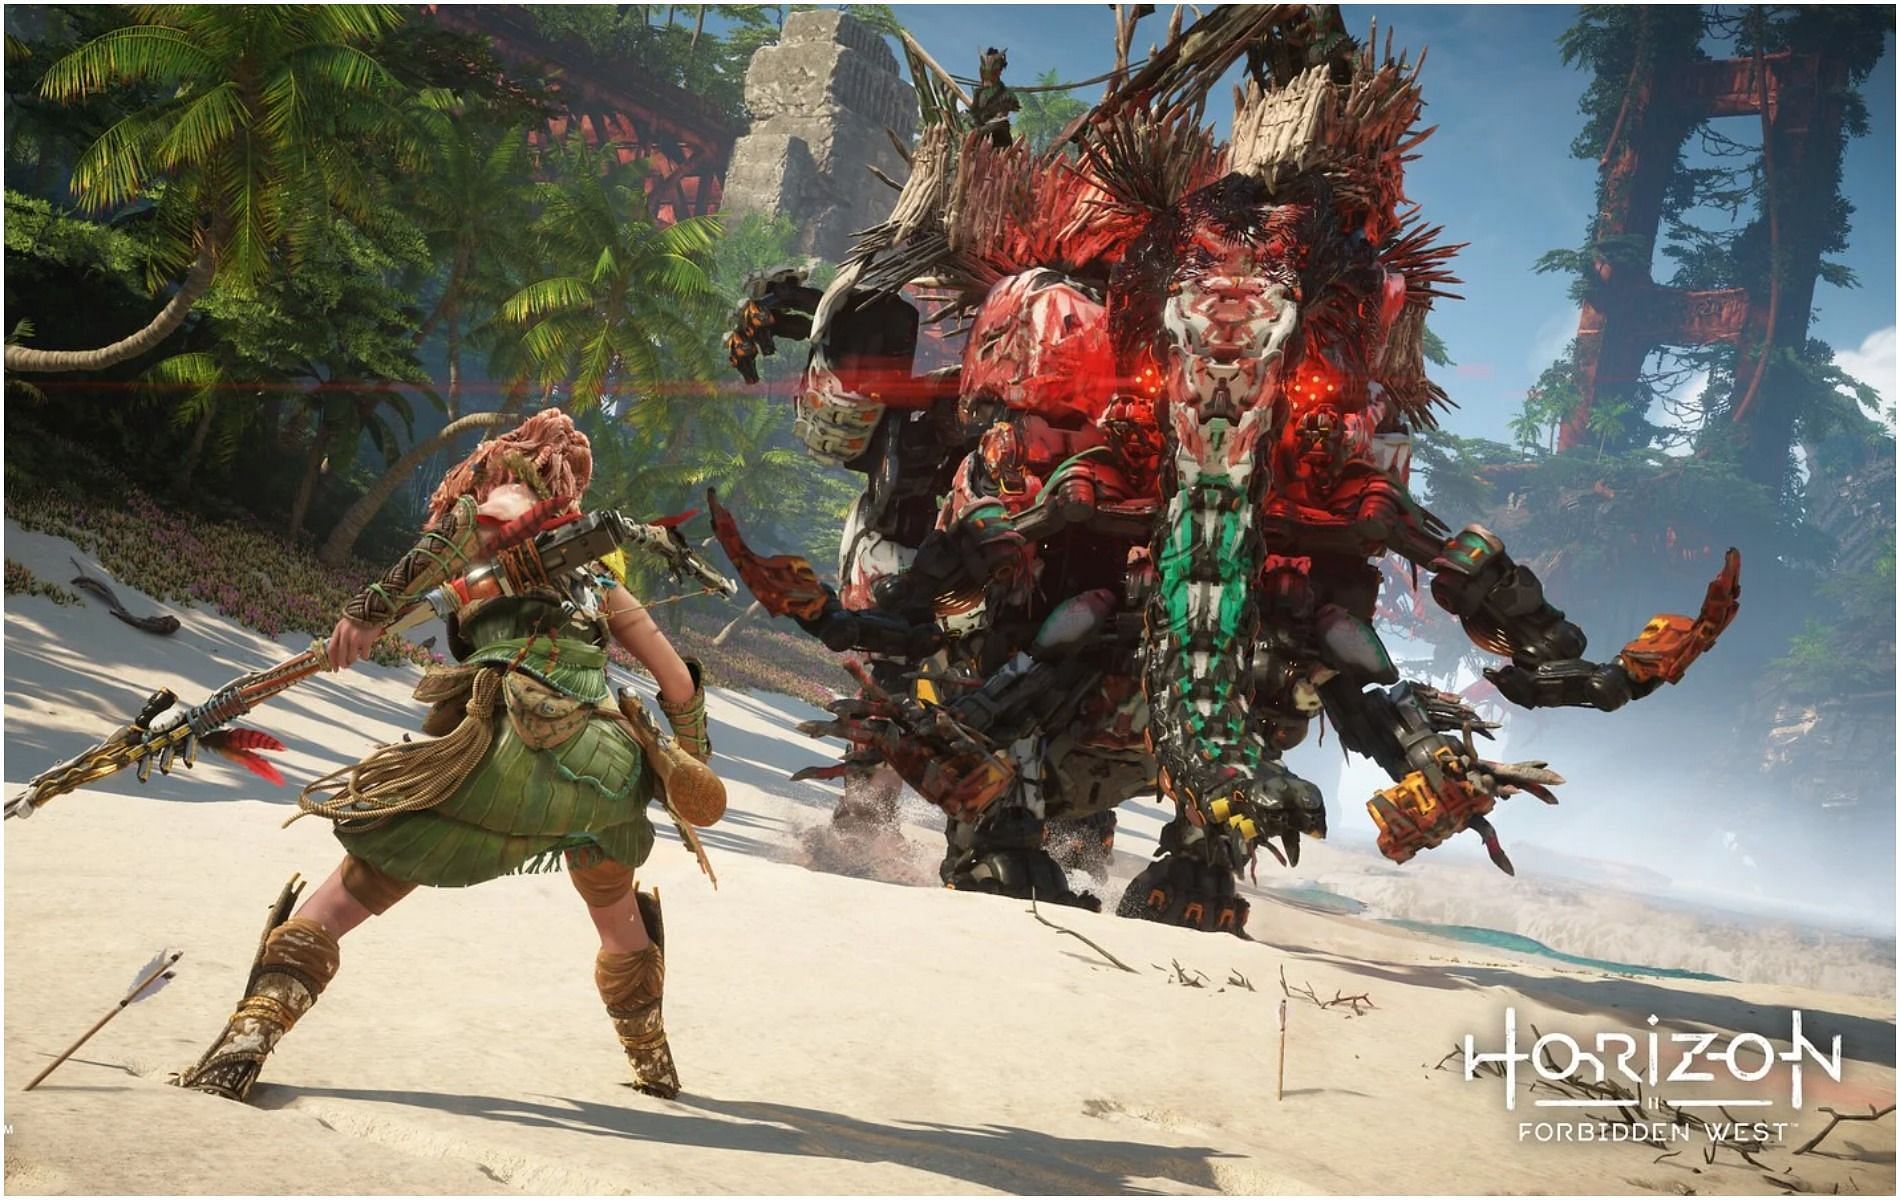 Players criticize Horizon Forbidden West: Burning Shores because of Aloy's  same-sex romance - user rating on Metacritic is only 3.2 points - Aroged